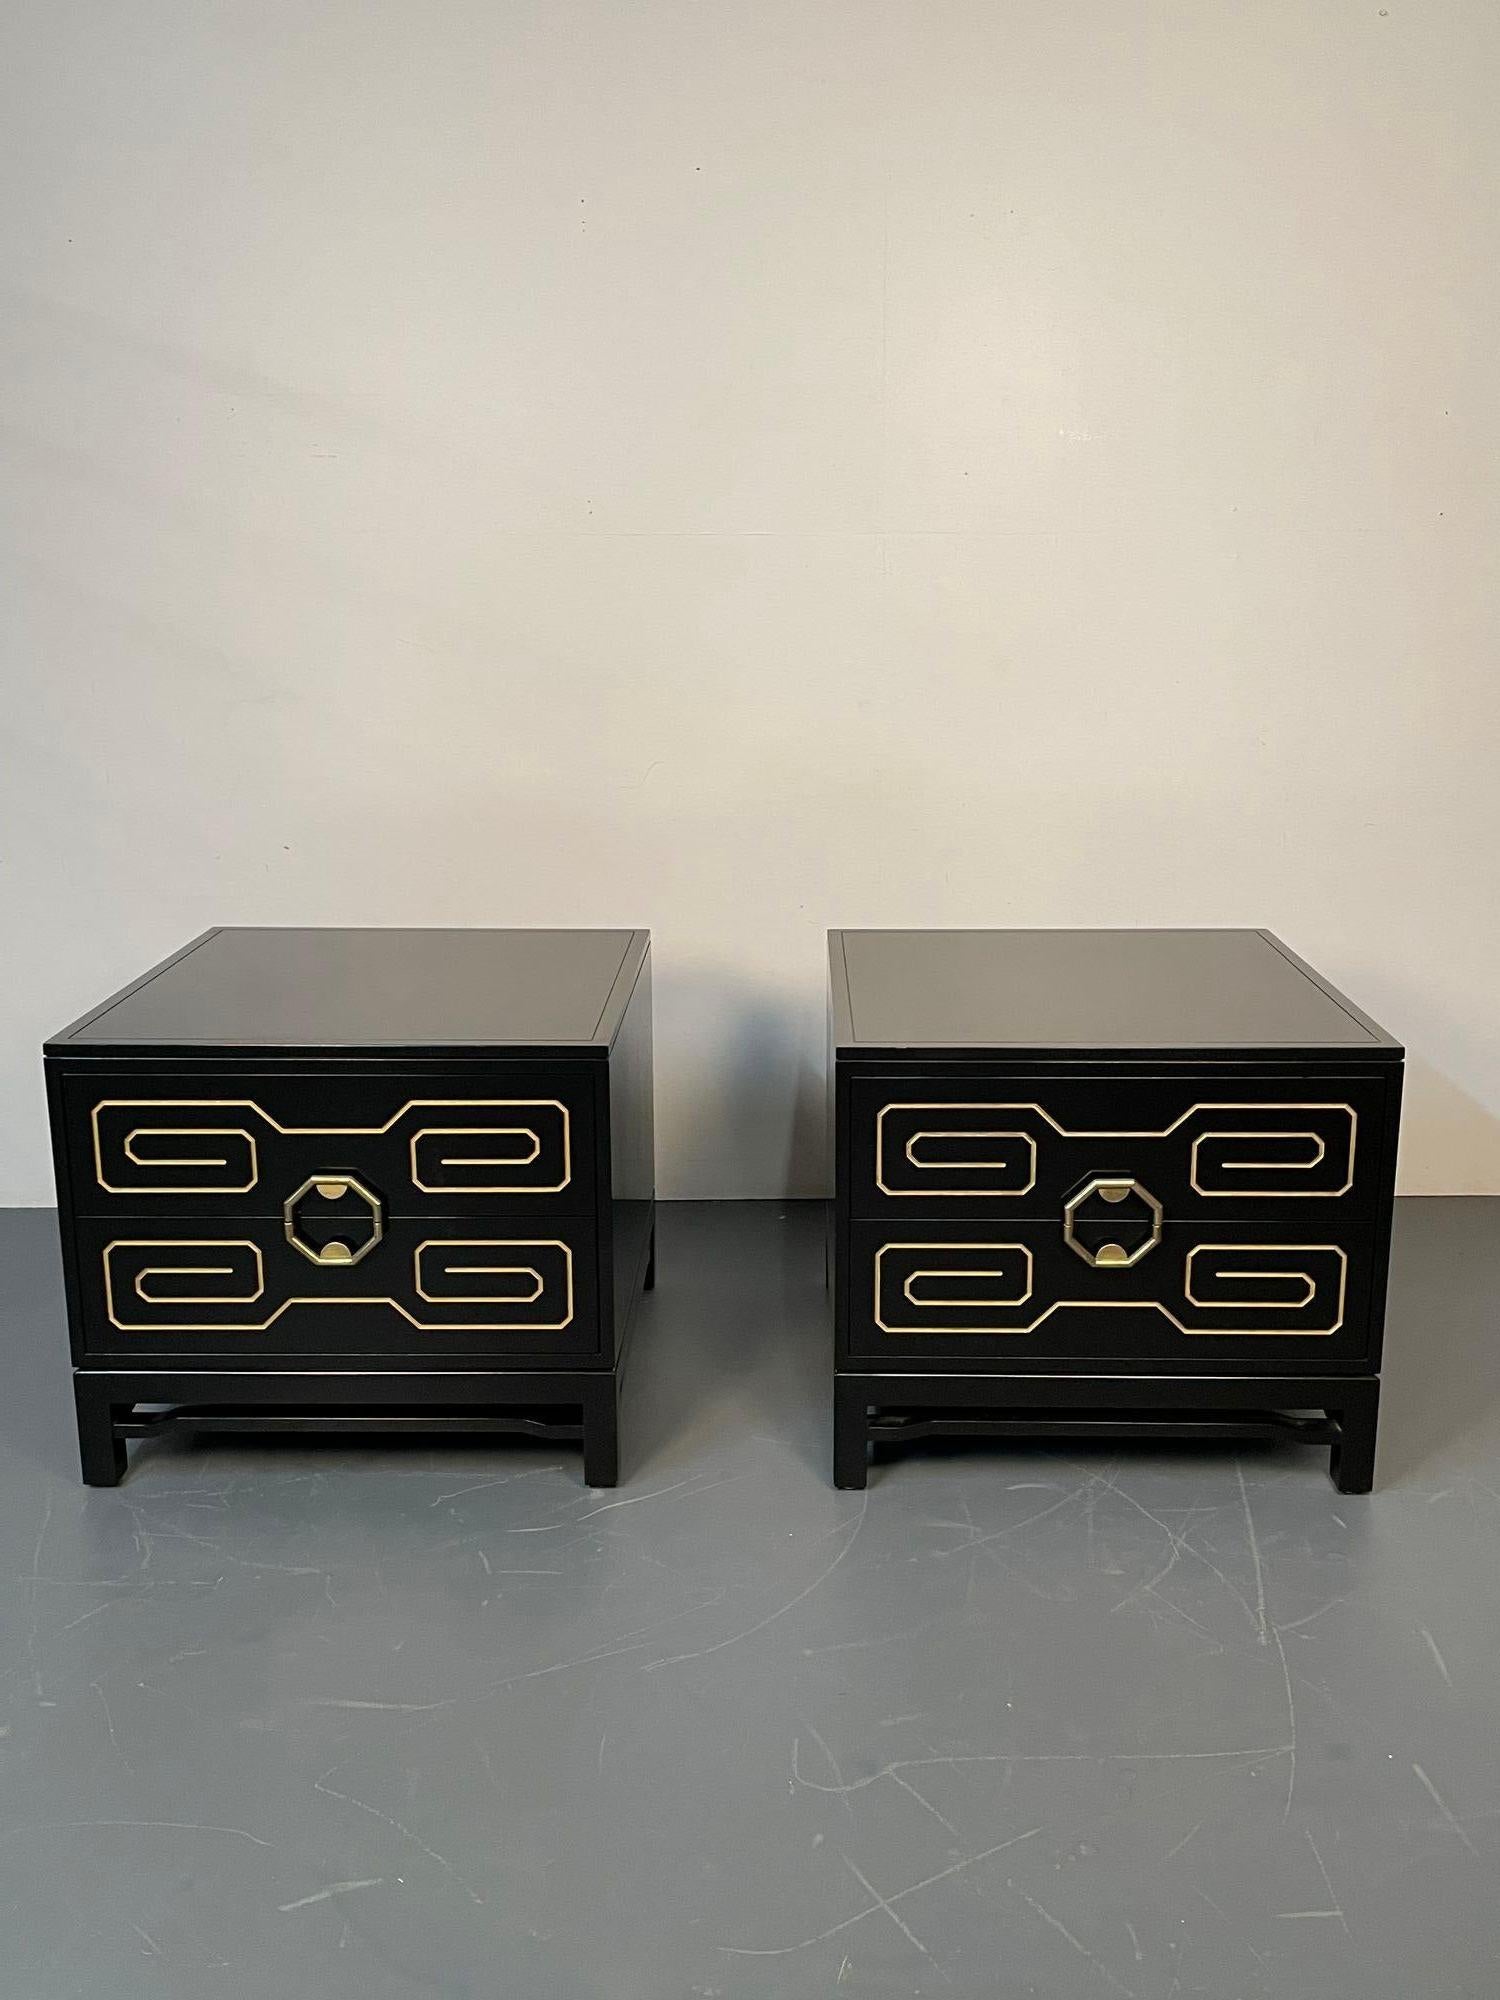 Pair of Mid-Century Modern nightstands / Dressers, Greek Key, Mastercraft Style
 
Low profile set of ebony nightstands having recessed Greek key gilt inlay and original Asian inspired brass handles. Recently refinished in a black satin ebony